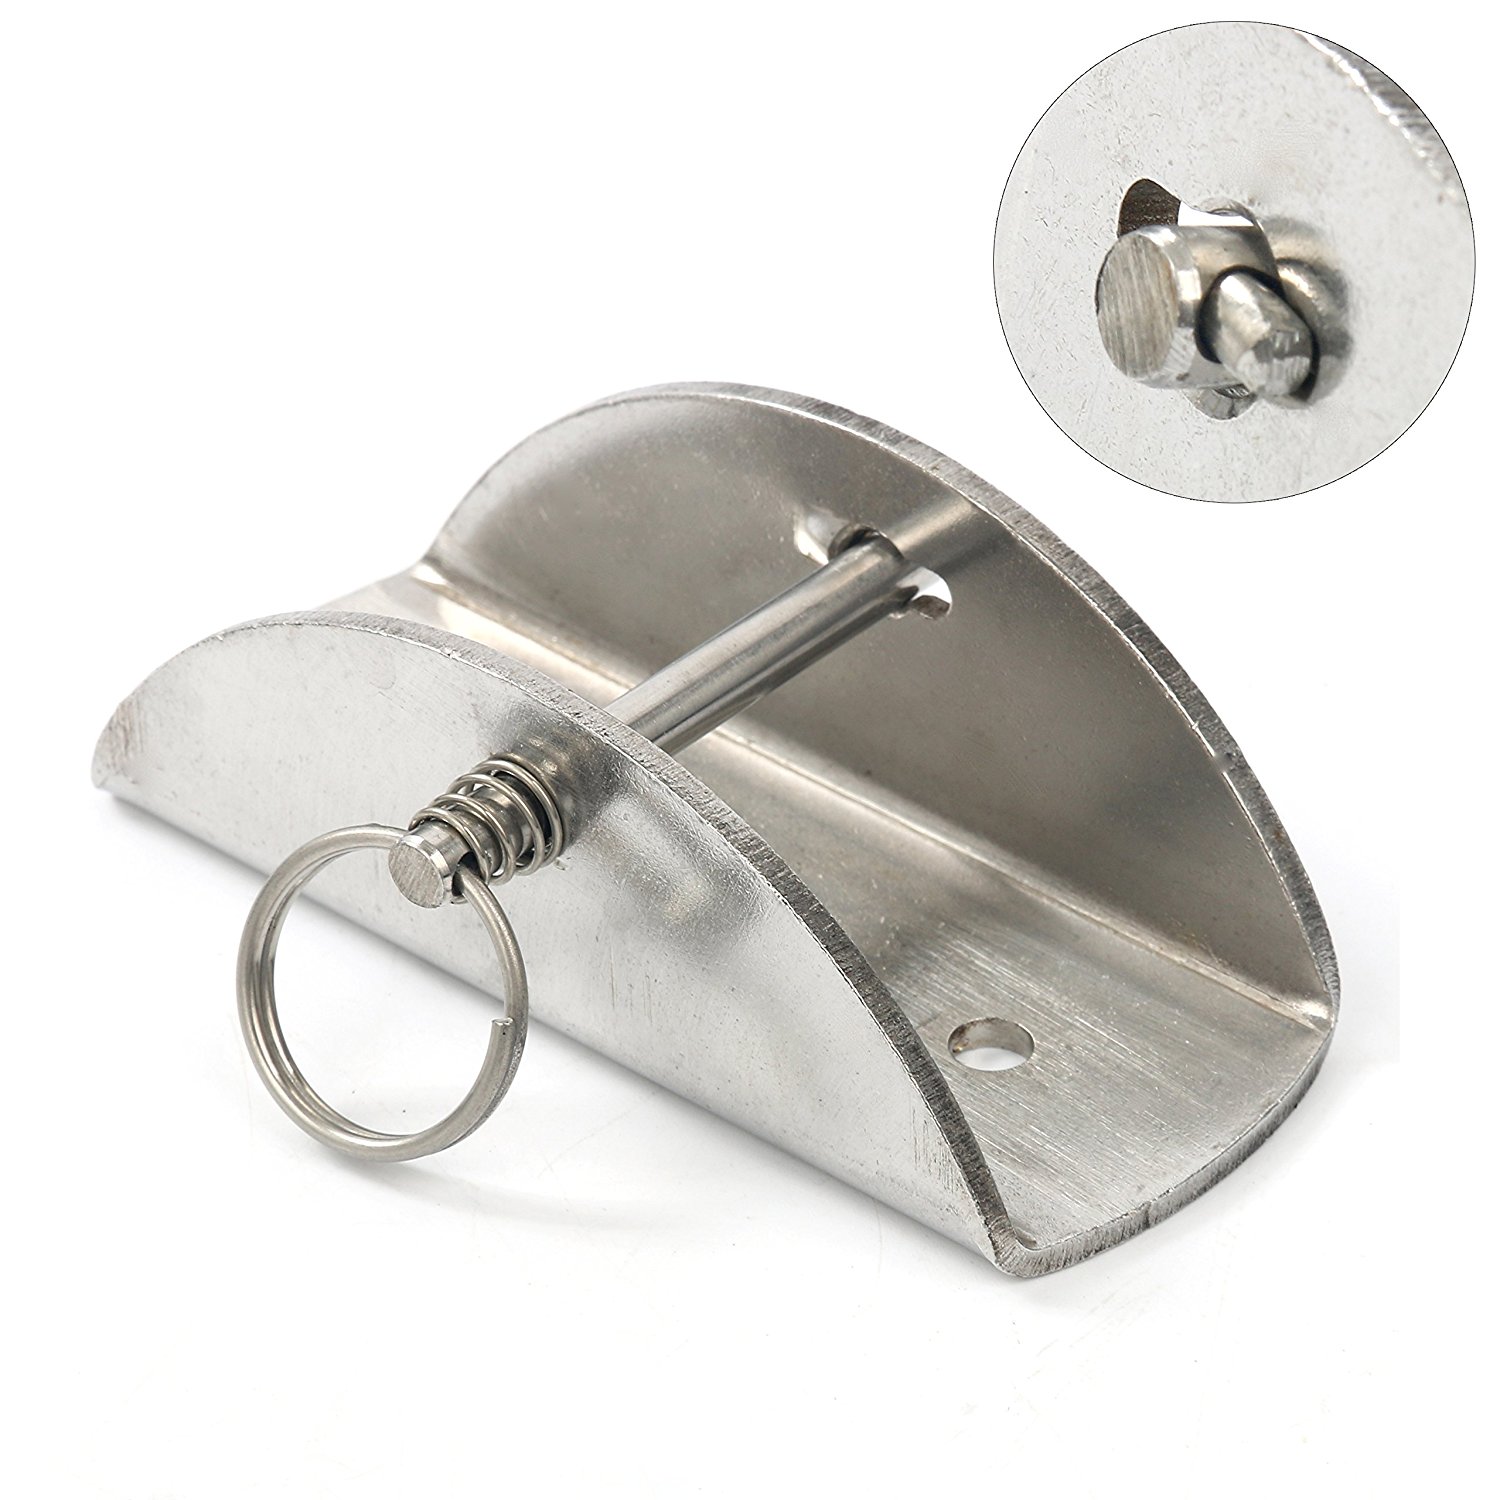 Amarine-made 316 Stainless Steel Bow Anchor Roller-Fixed-02204s US FAST SHIPPING